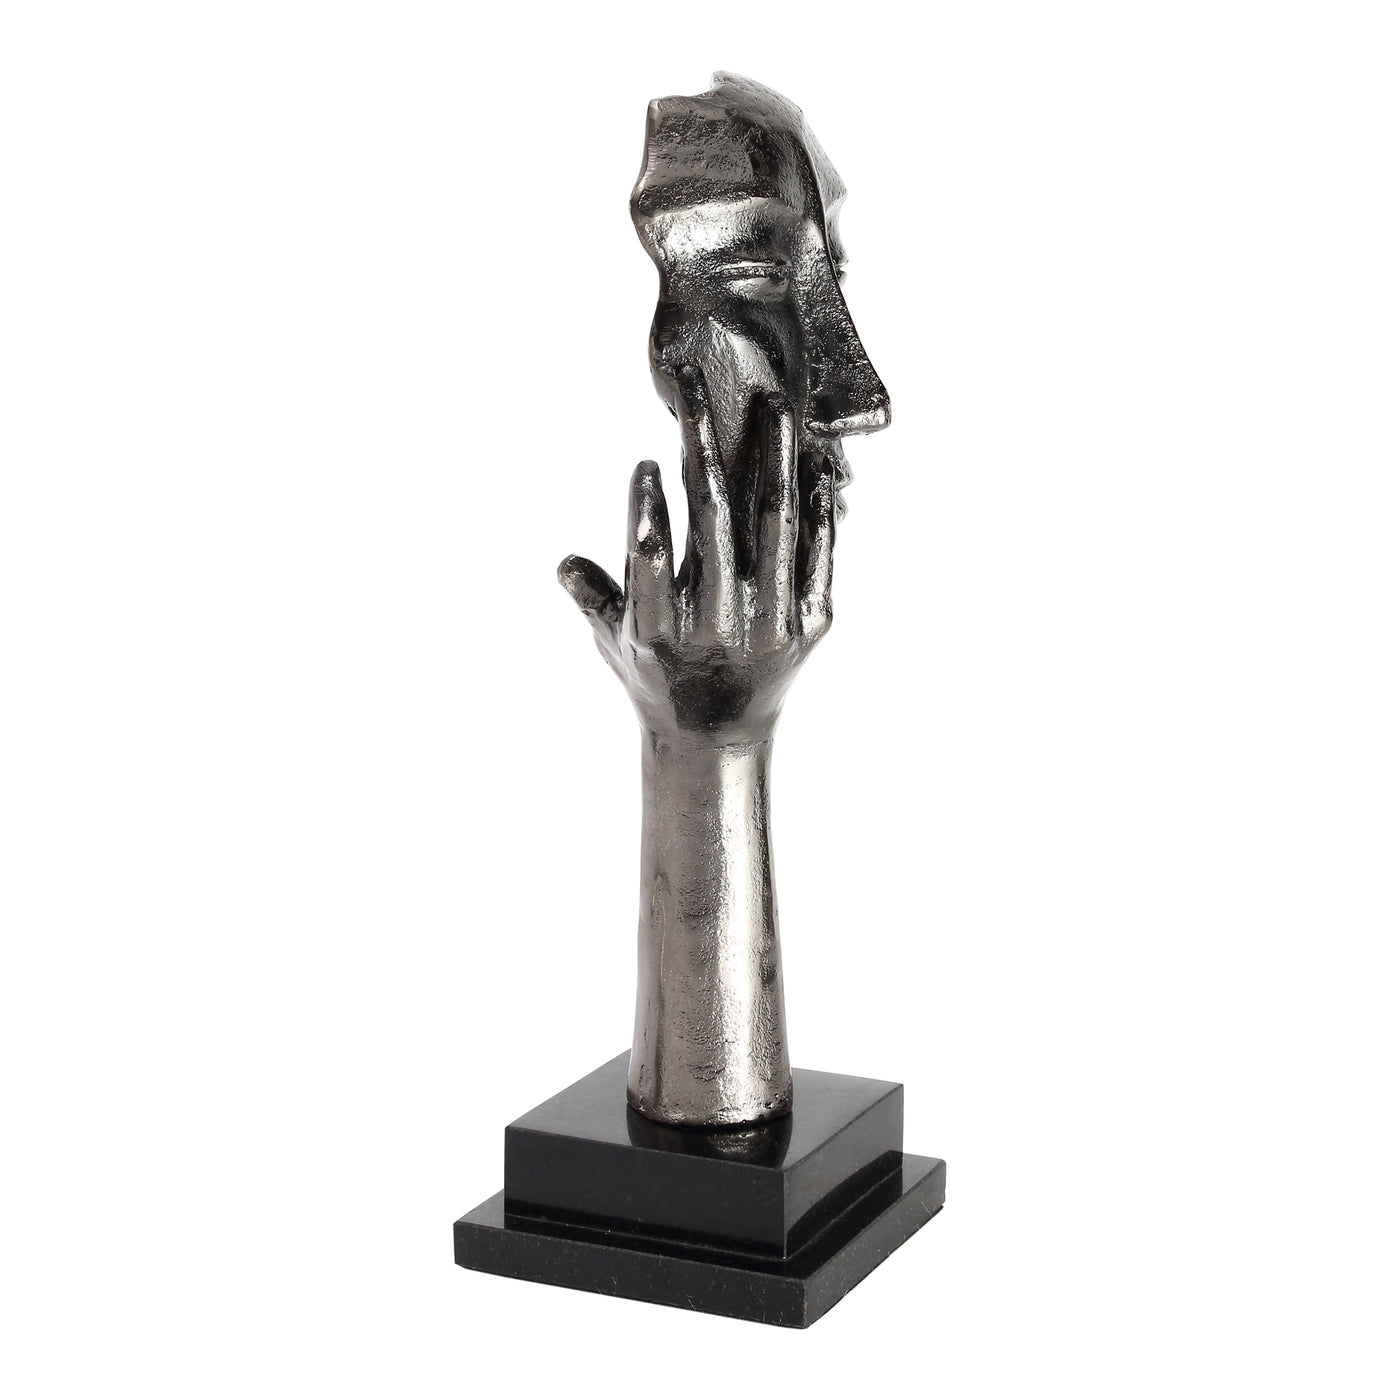 A single hand holds a perched face with eyes closed, showcasing intense contemplation through unique presentation. This ac...